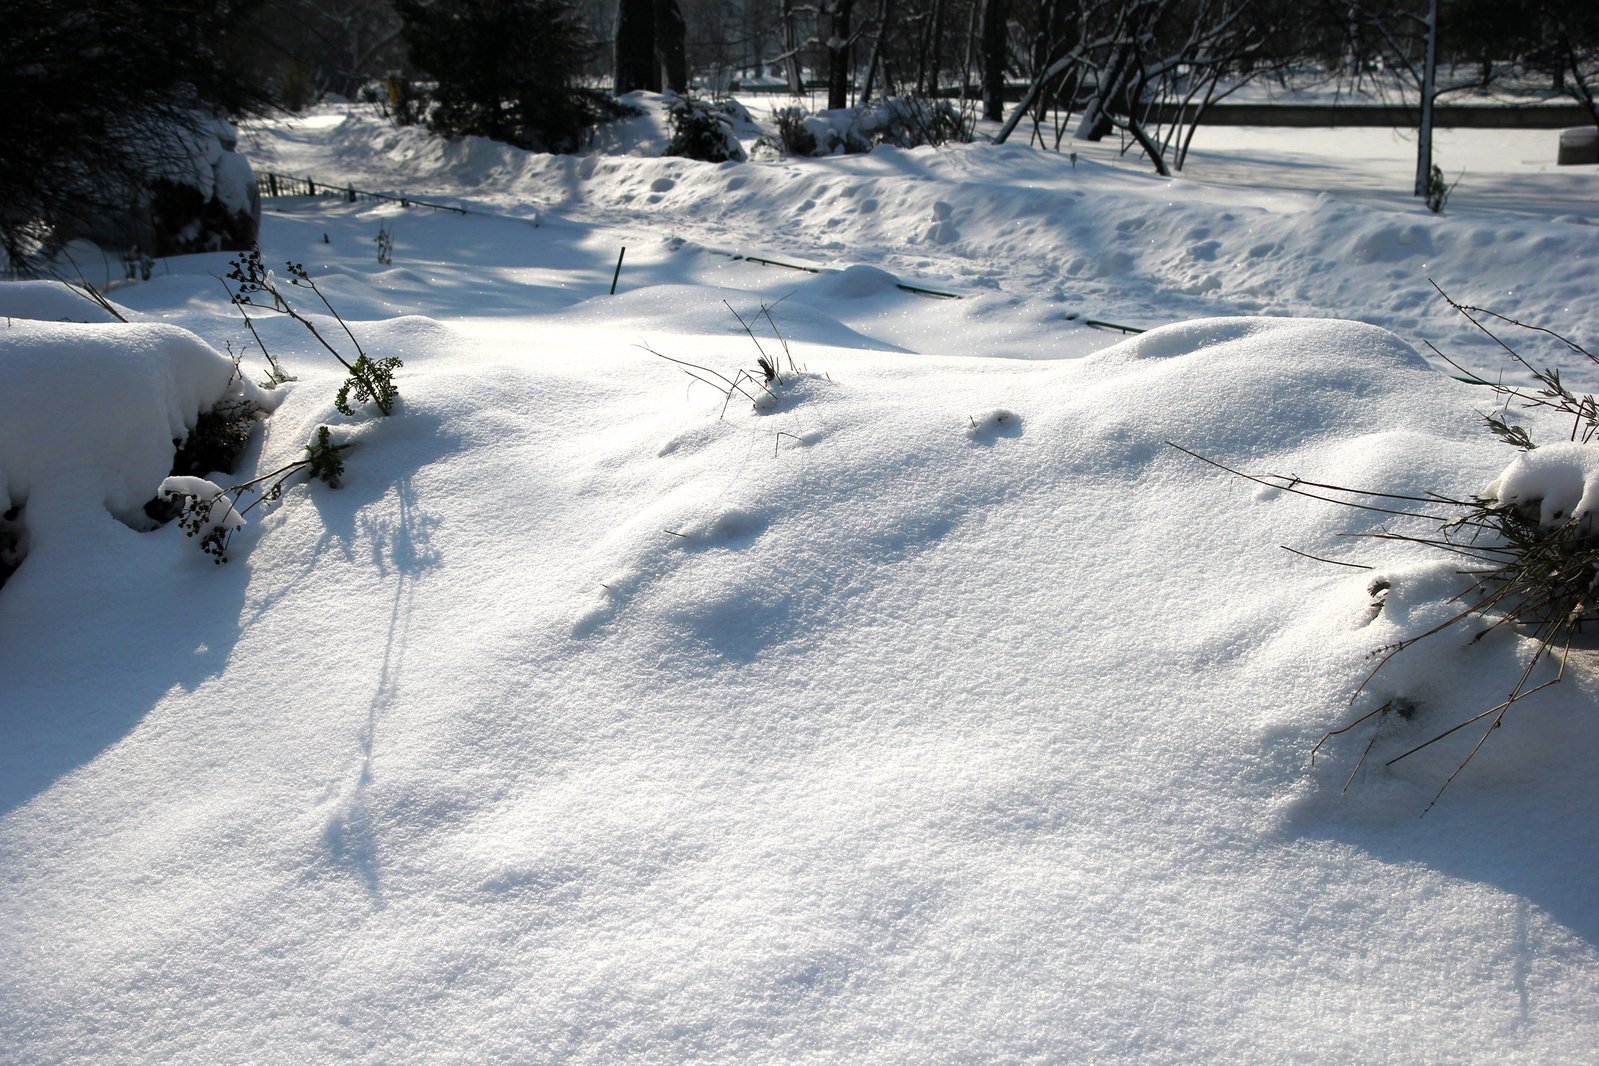 a snowy landscape covered in snow, with bushes and trees in the foreground